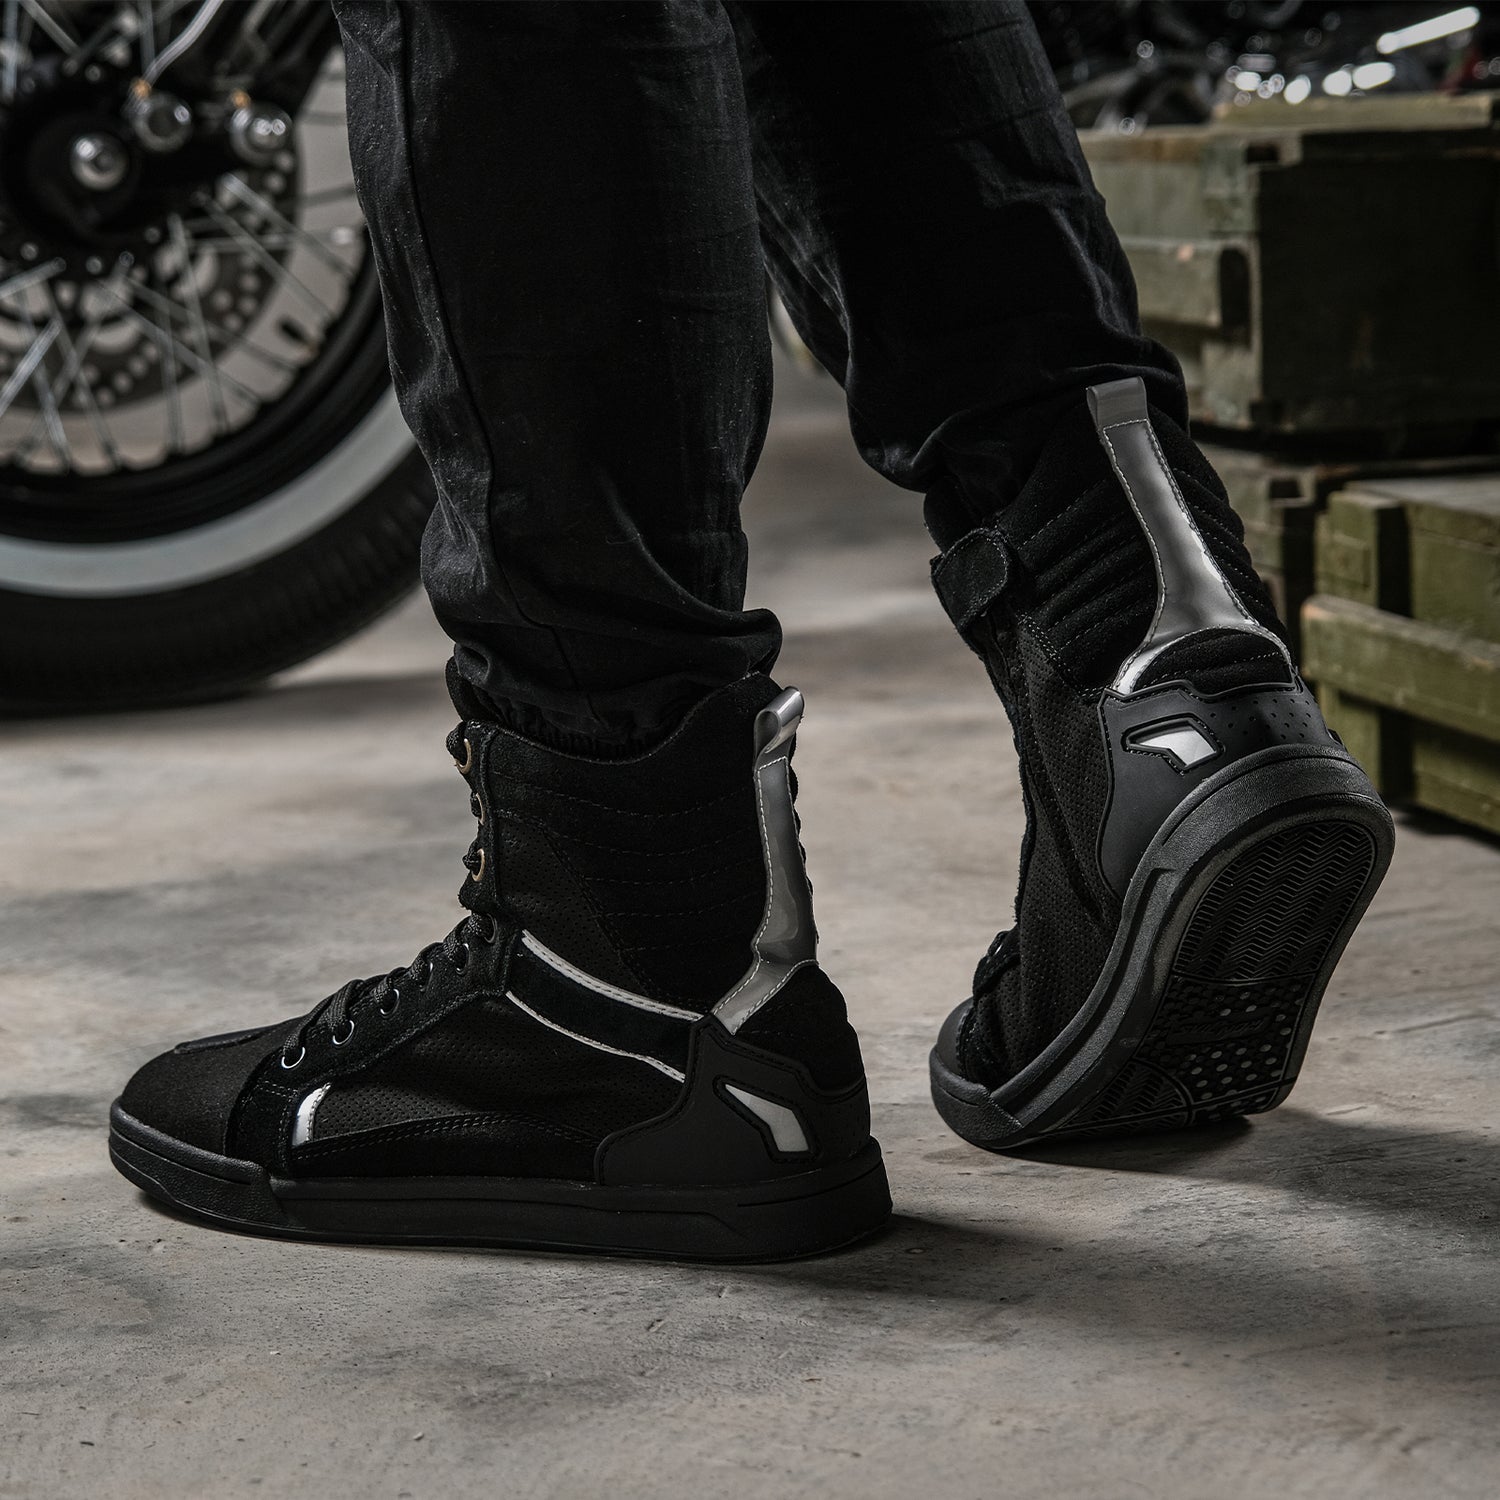 IRON JIA'S Motorcycle Shoes for Men, Anti-Slip Breathable Street Casual  Motorcycle Riding Boots with Side Zipper, Ankle Support, Shift Pads Black 10